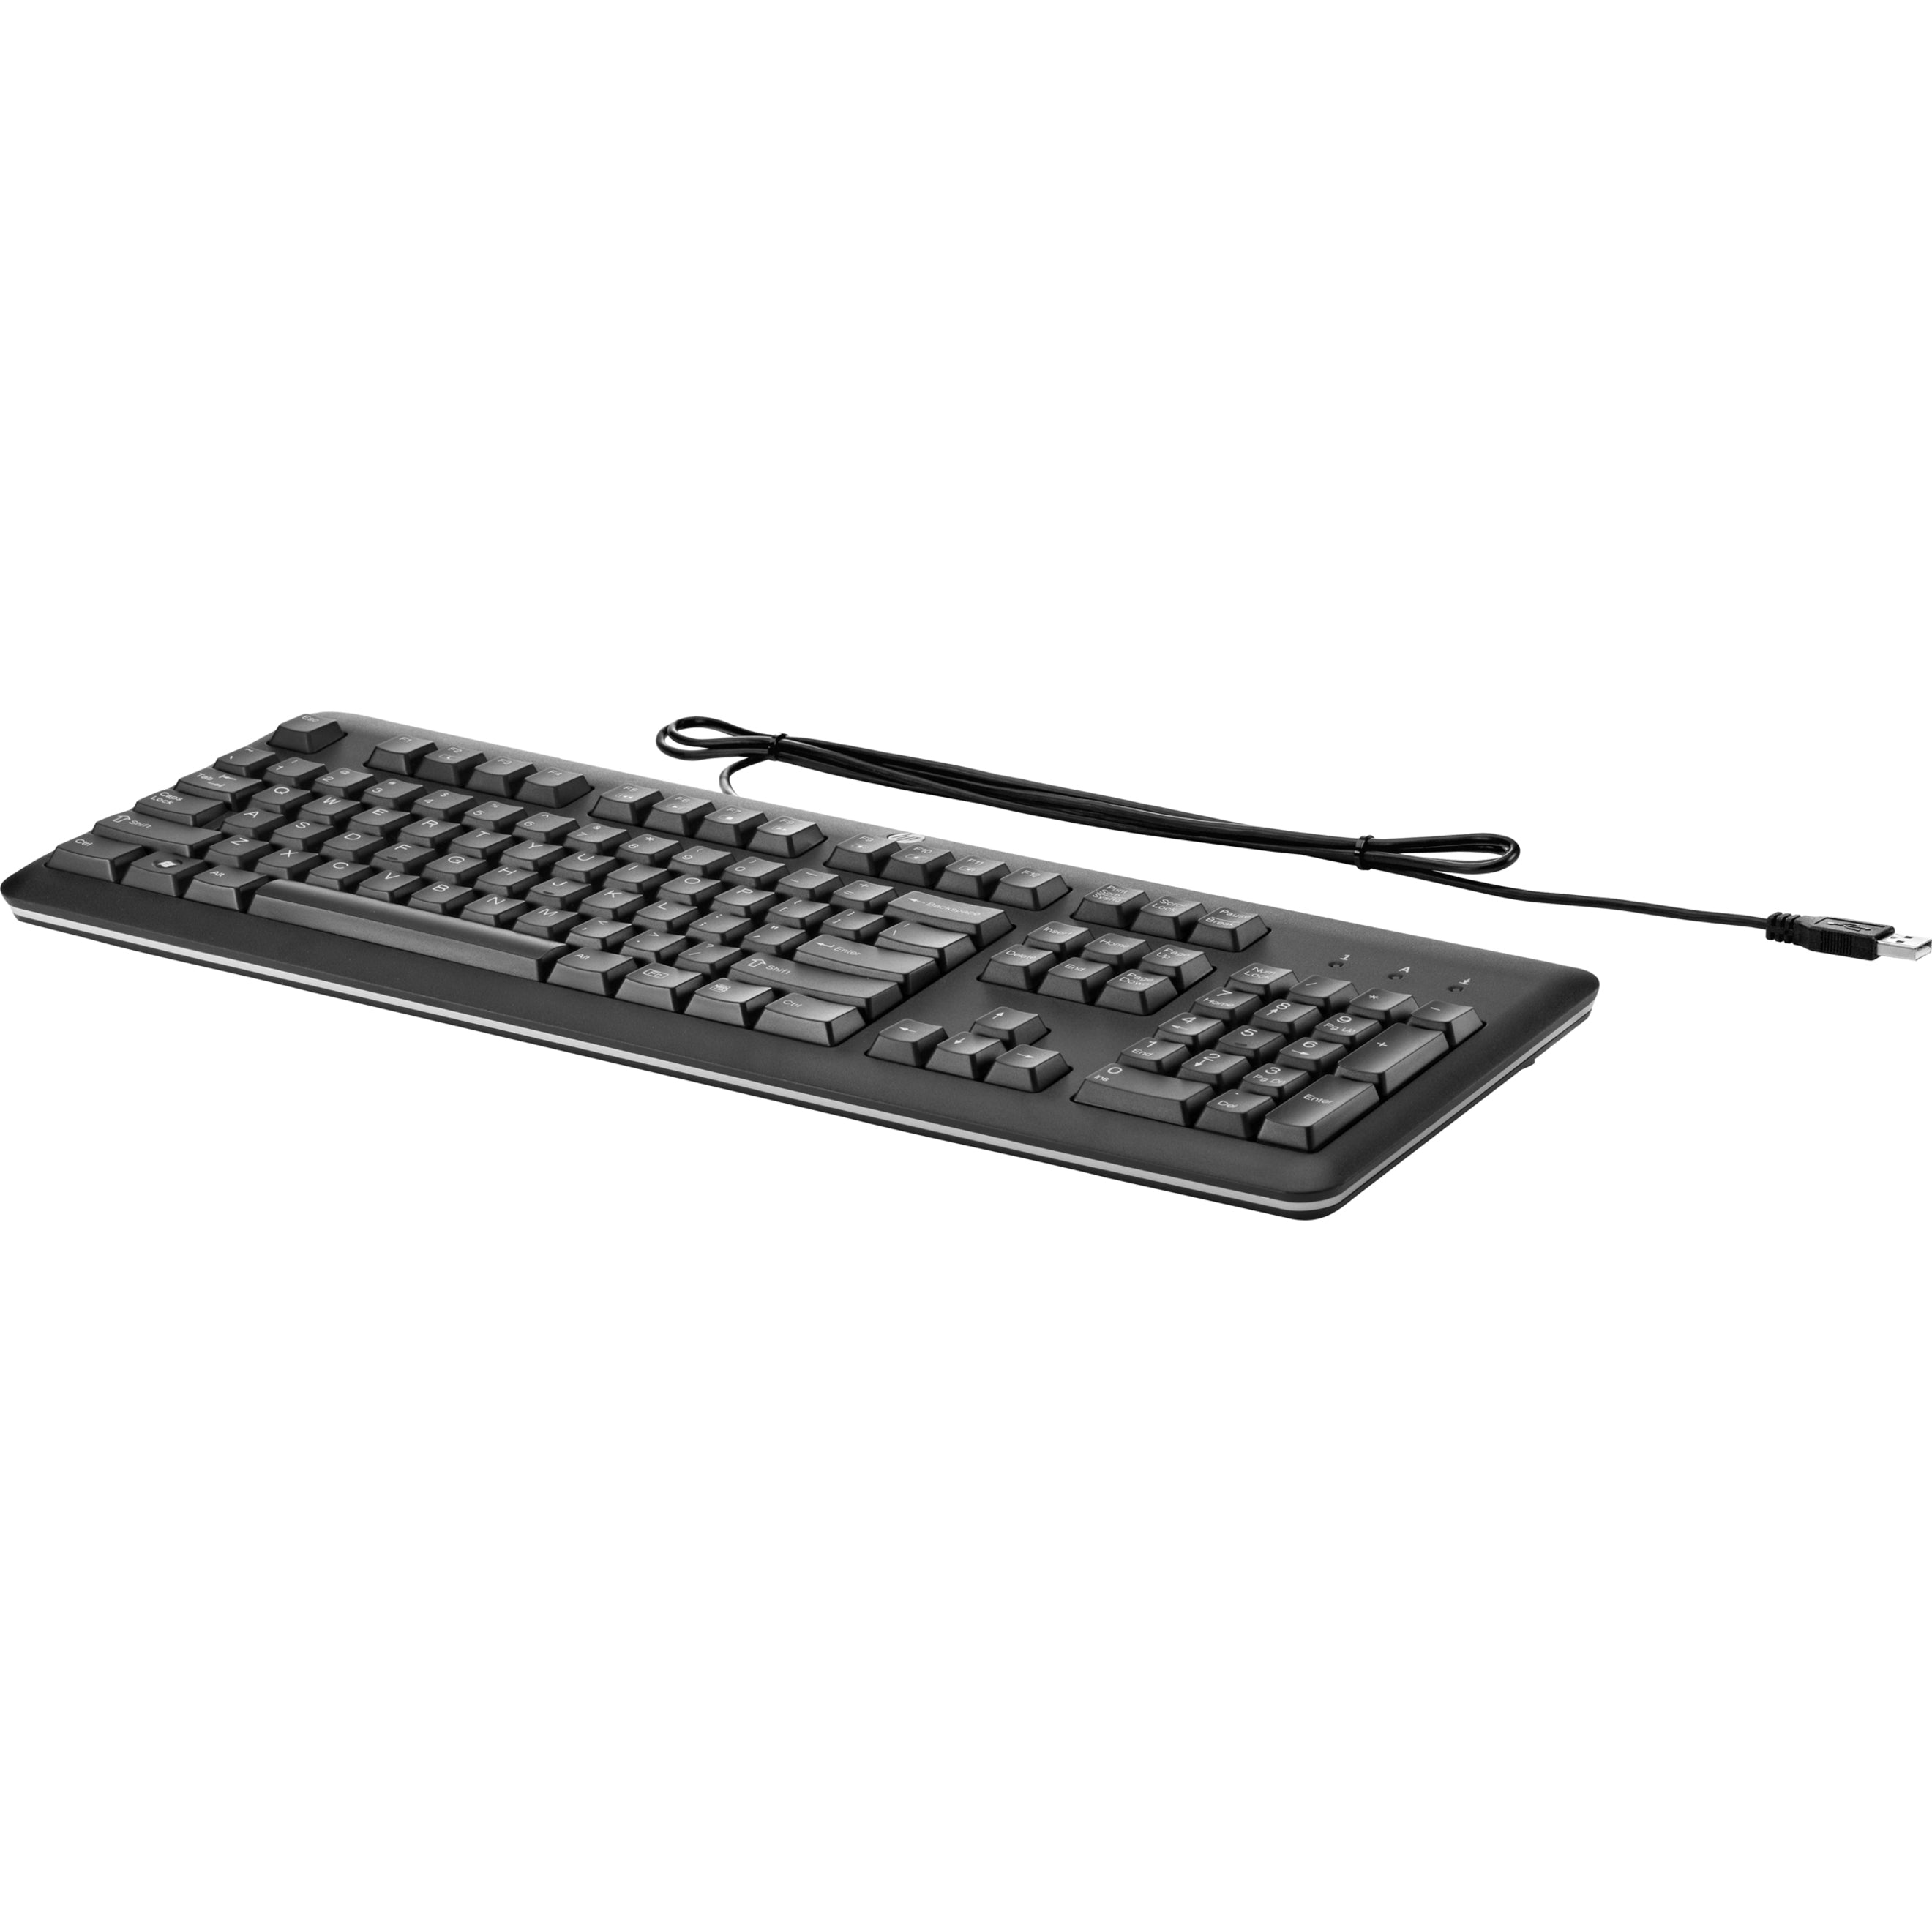 HP USB Keyboard US, Spill Drain, 6 ft Cable, Black